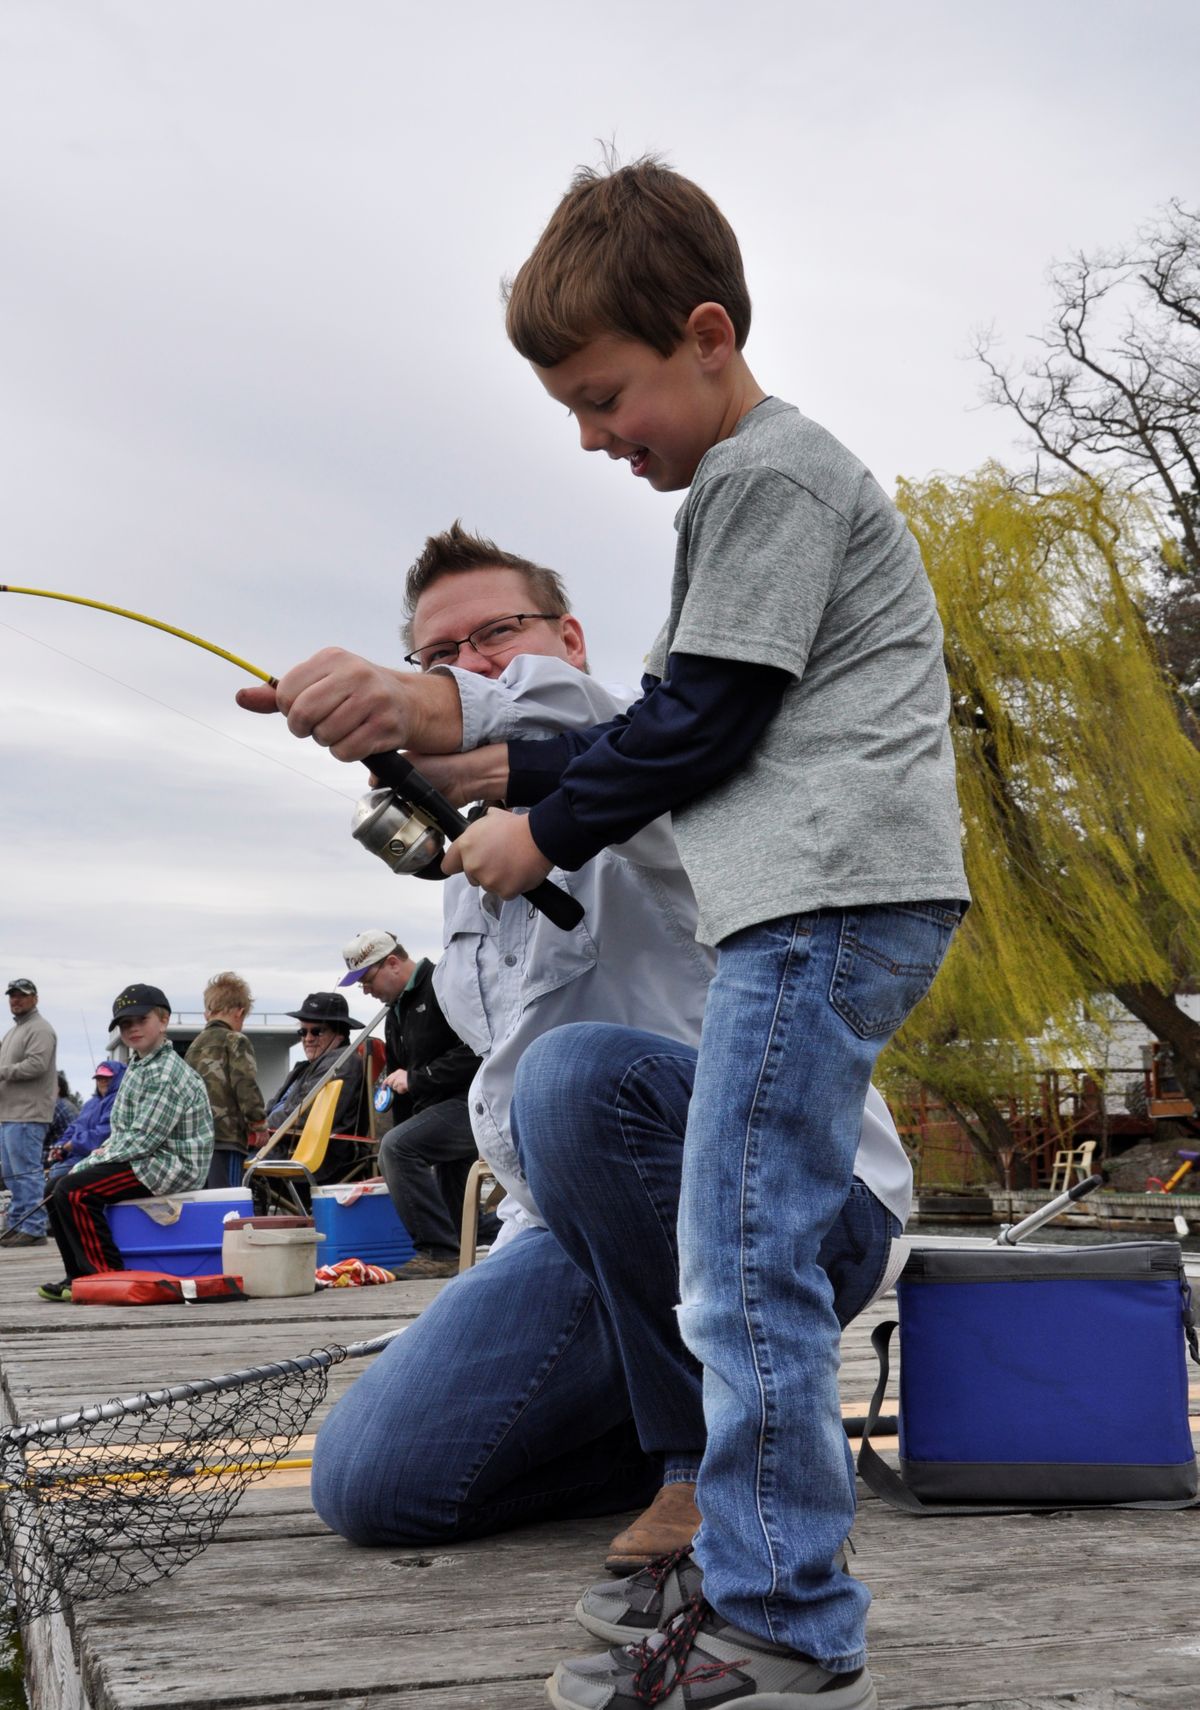 Quinn Connacher, 6, of Spokane works to catch his first trout while fishing off the dock at Bunker